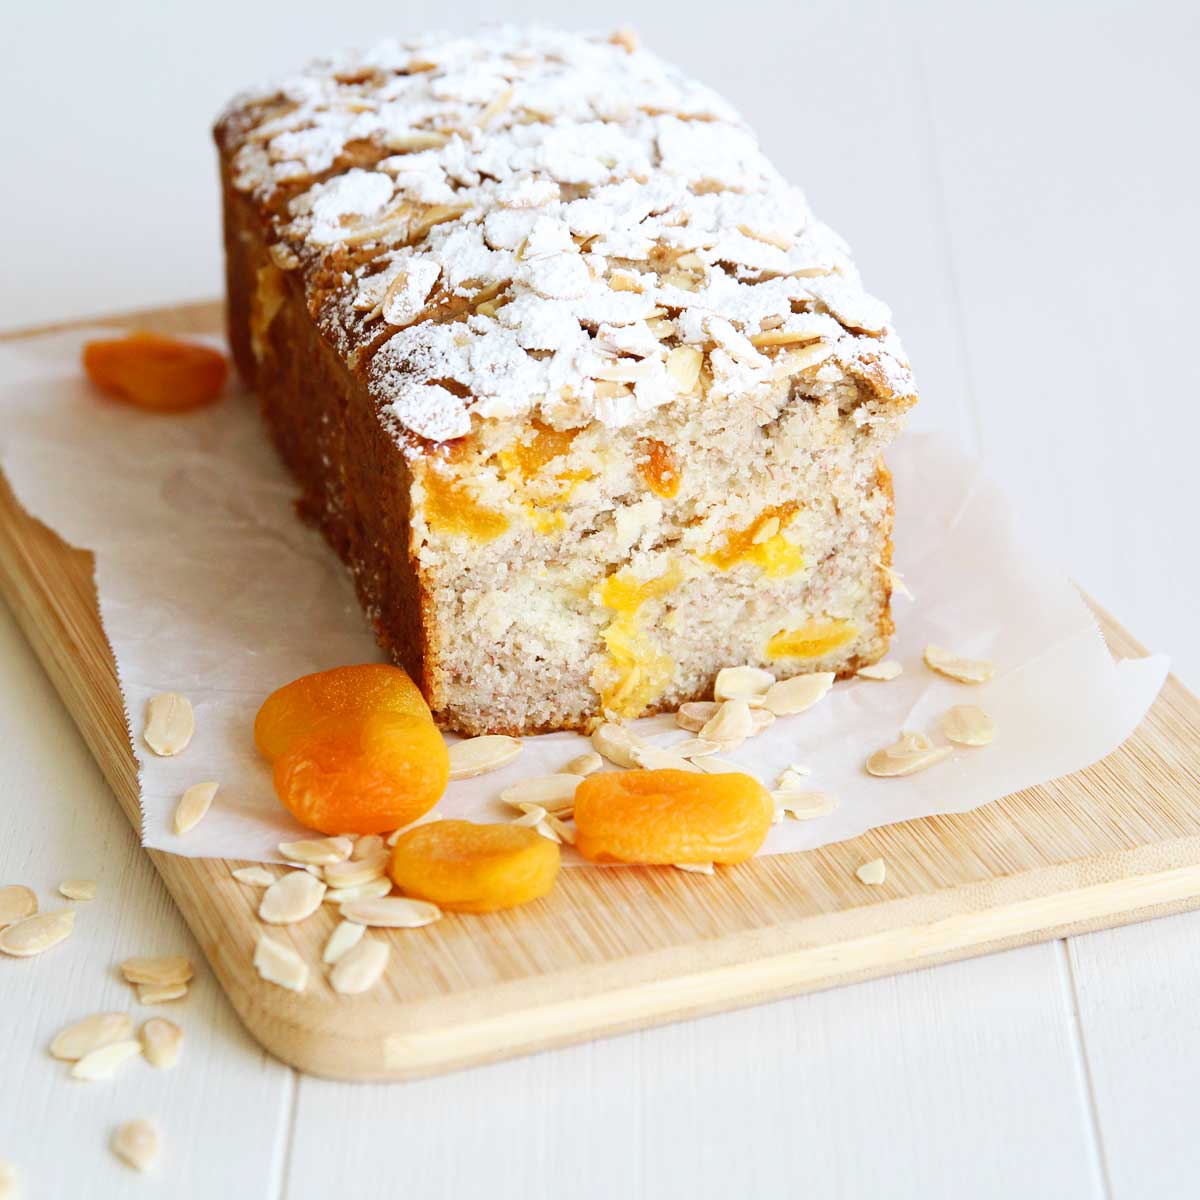 Simply Divine: Moist Vegan Almond Banana Bread with Apricots (Eggless, Dairy Free!) - Peanut Butter Banana Bread